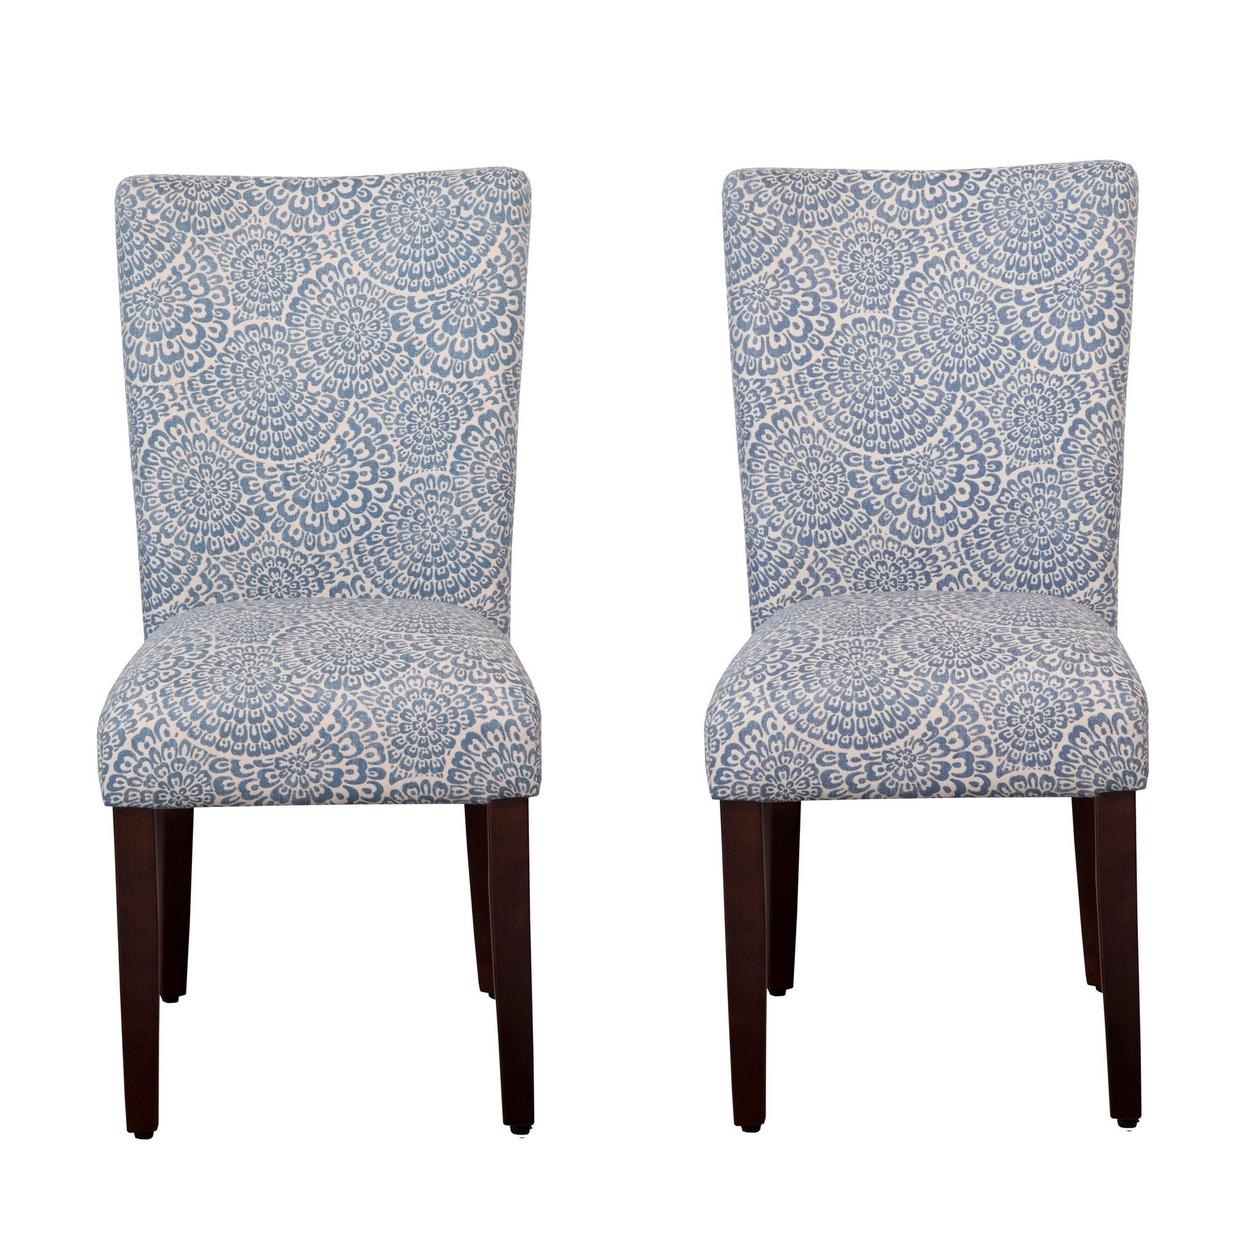 Wooden Parson Dining Chairs With Floral Patterned Fabric Upholstery, Blue And White, Set Of Two- Saltoro Sherpi